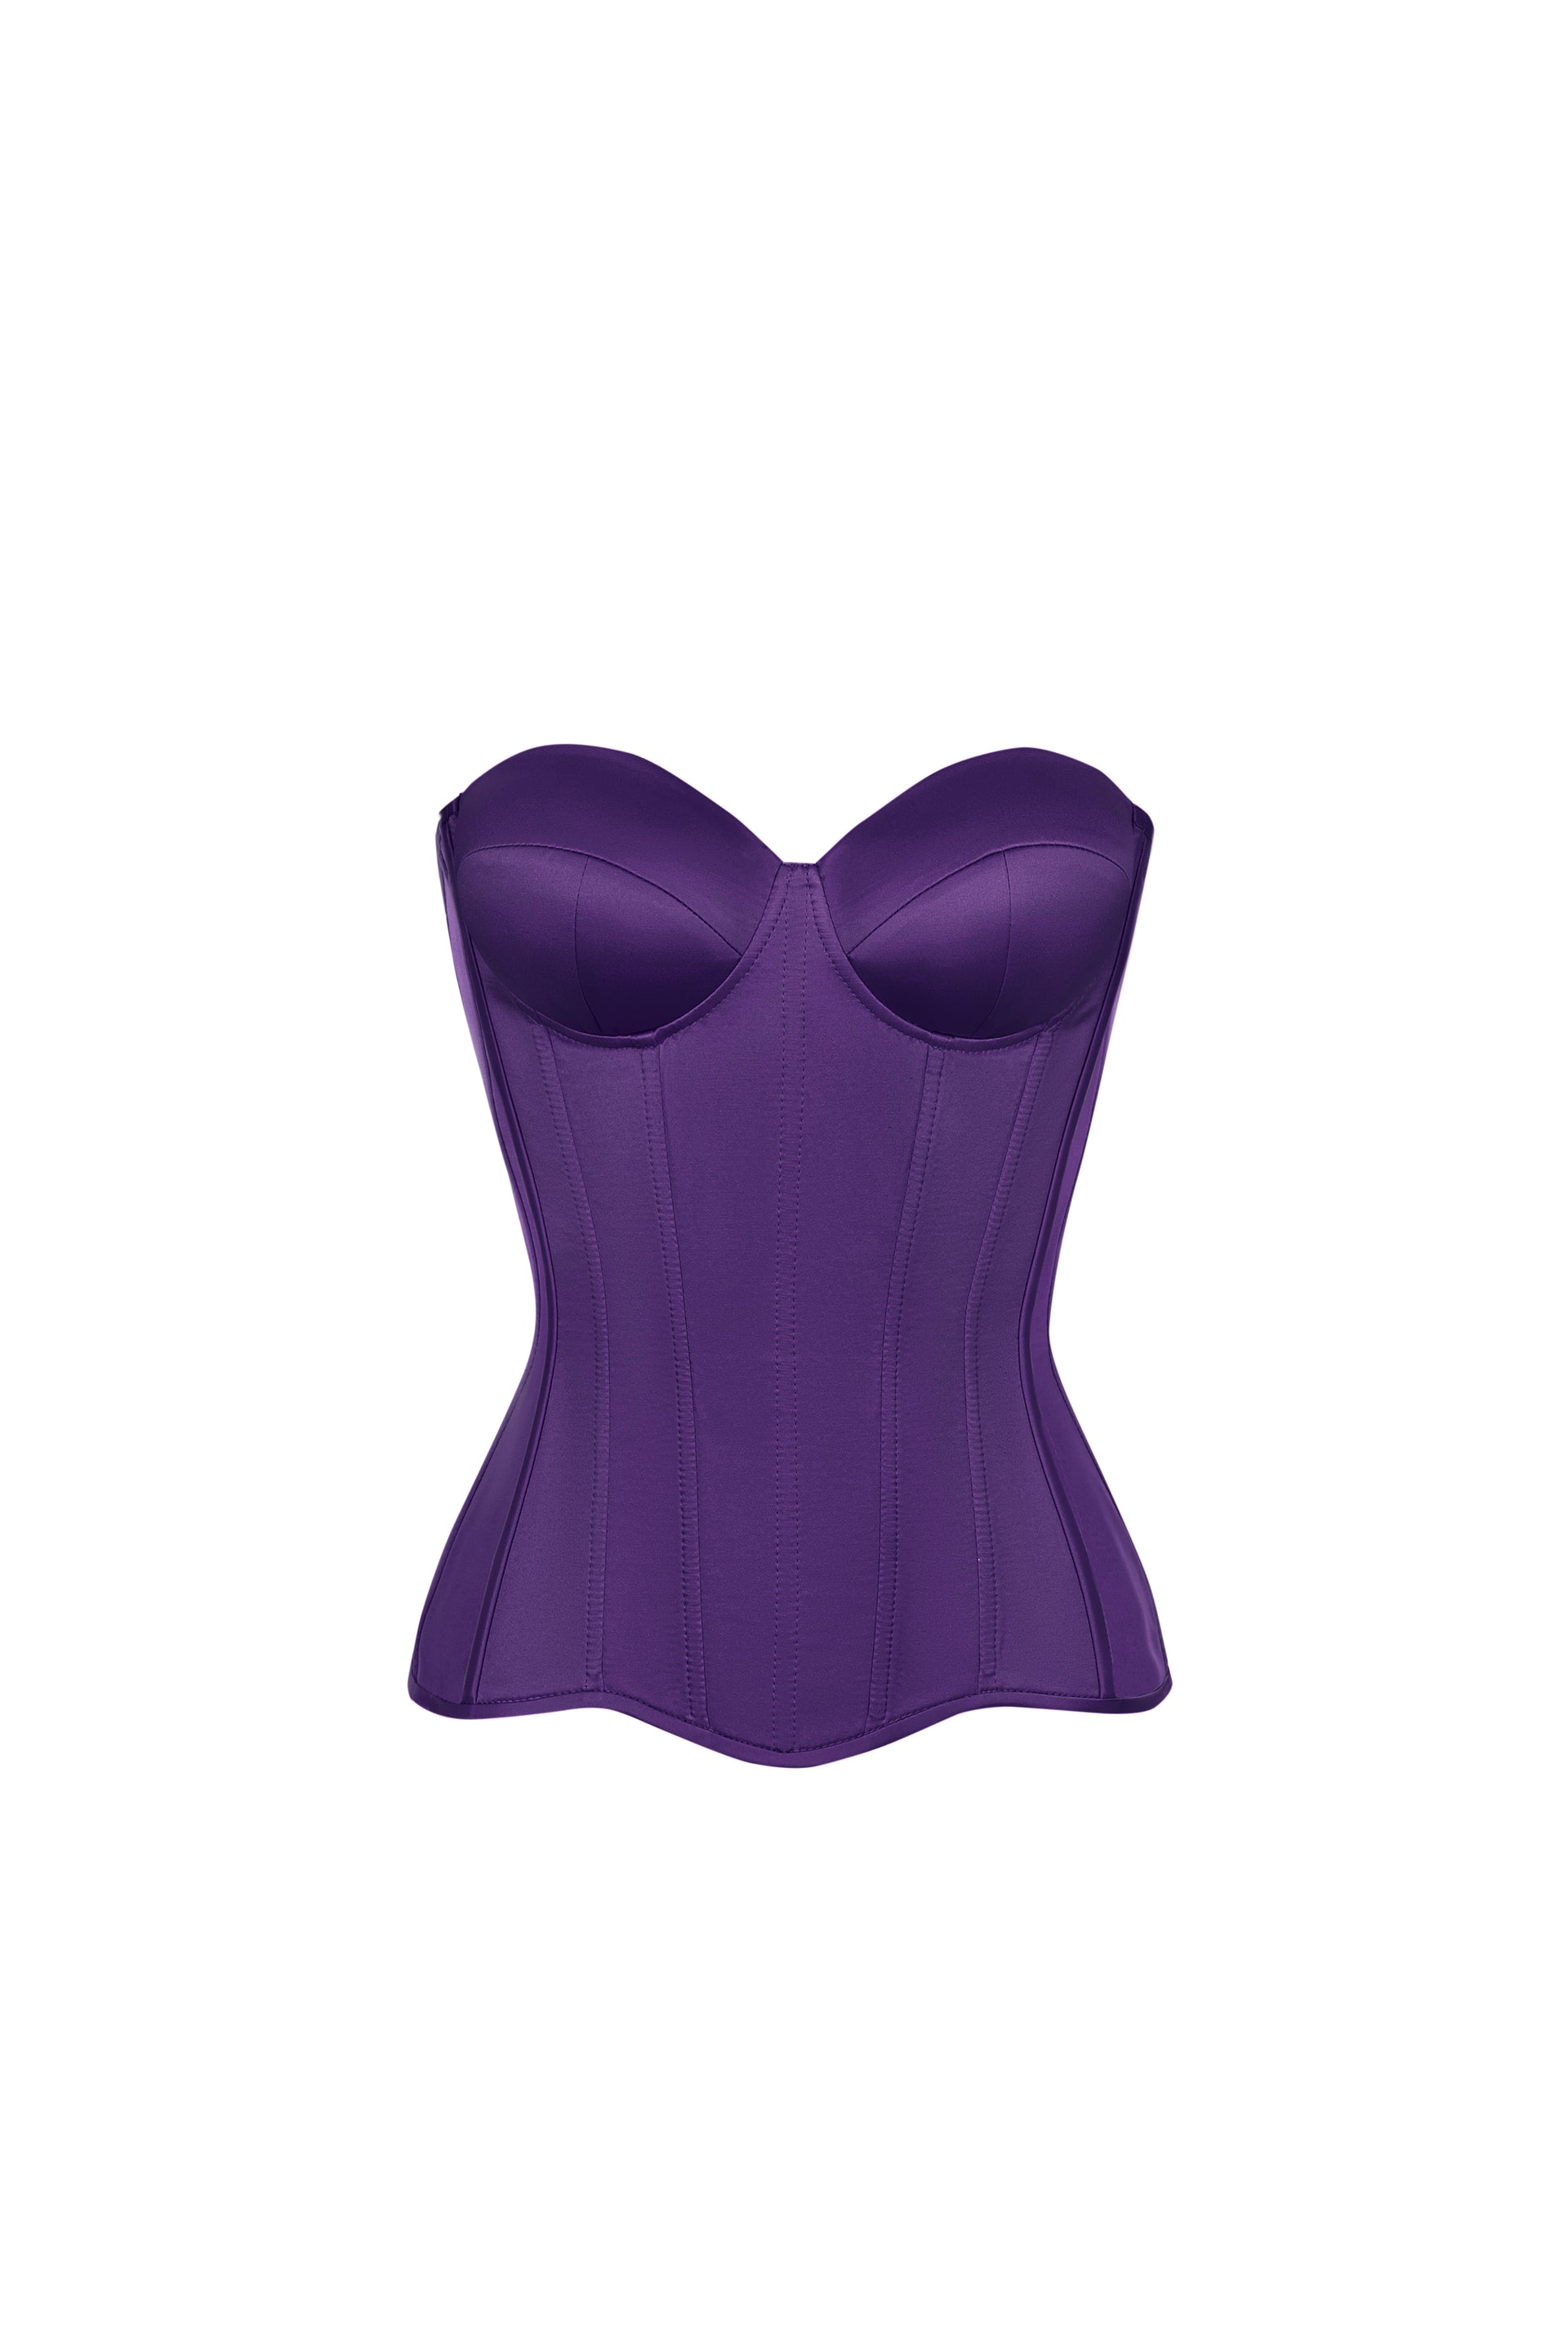 Purple satin corset with cups